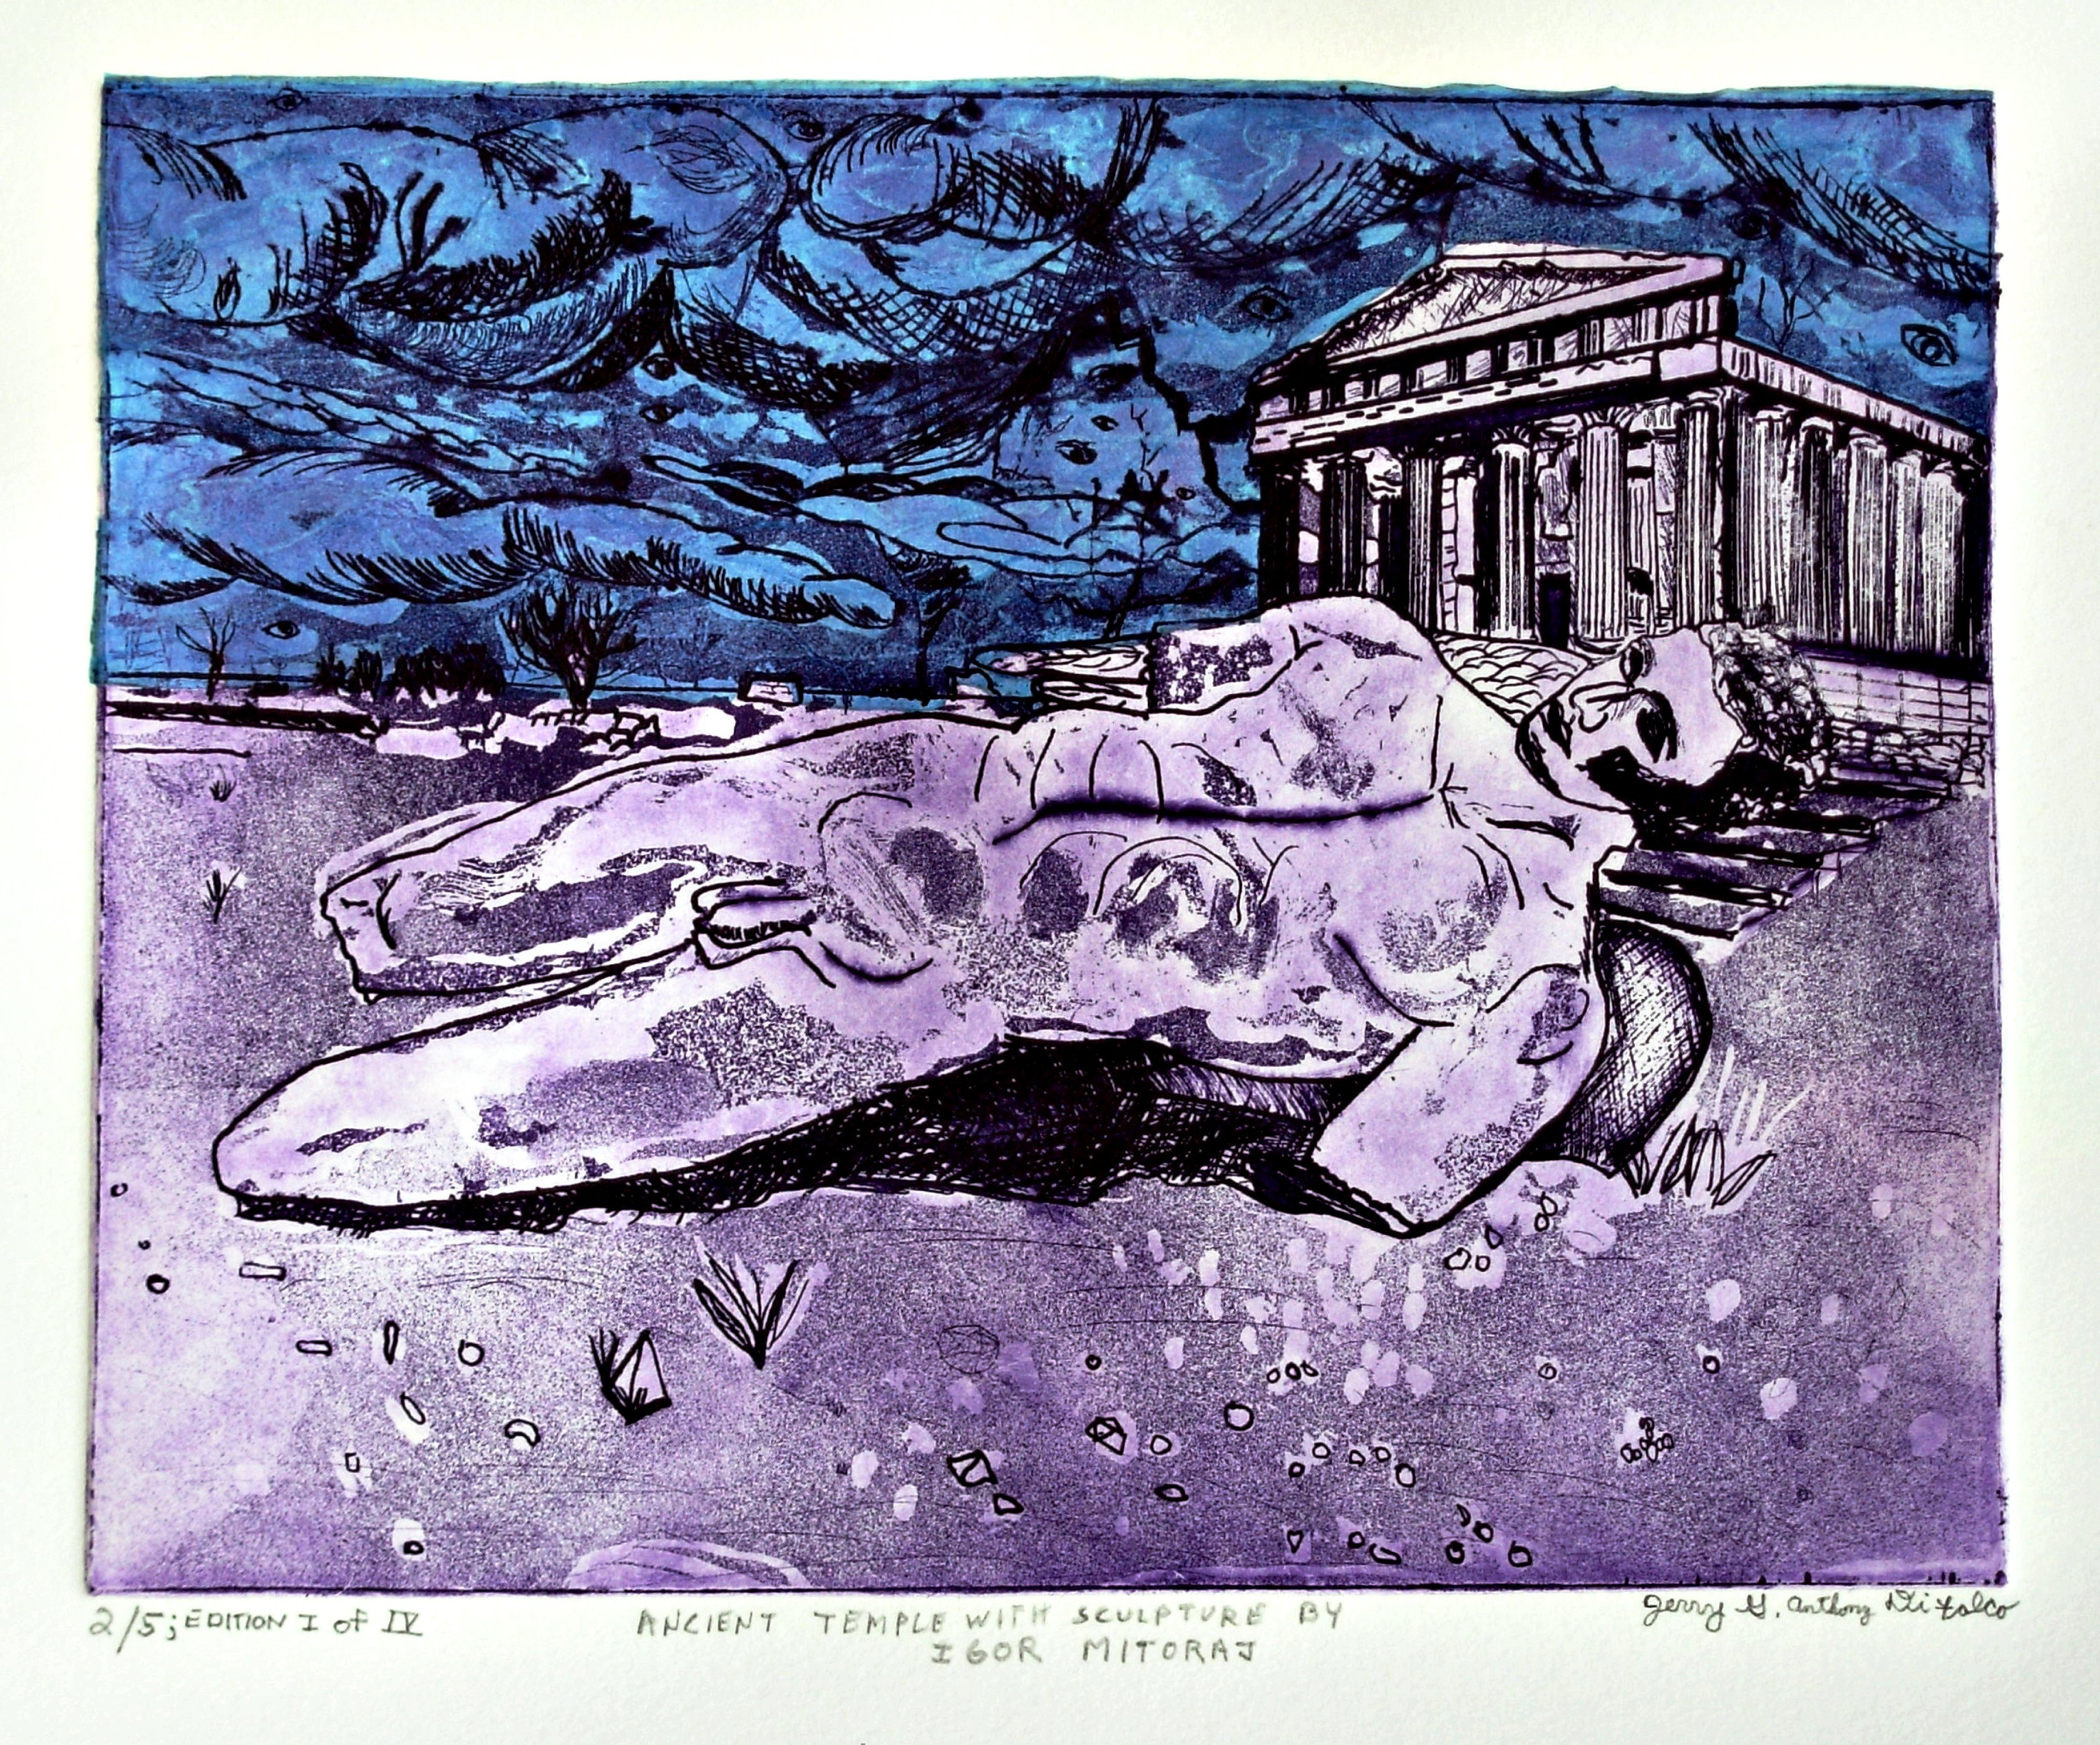 Jerry  Di Falco: 'ANCIENT TEMPLE WITH SCULPTURE BY IGOR MITORAJ', 2015 Etching, Surrealism. My title for is, ANCIENT TEMPLE WITH SCULPTURE BY IGOR MITORAJ. I used the studio techniques of aquatint, drypoint, intaglio and Chine colle. This print is from the LAST of FOUR editions, and this one is the 2nd best print of 5. French, oil- based ink was used on Rives ...